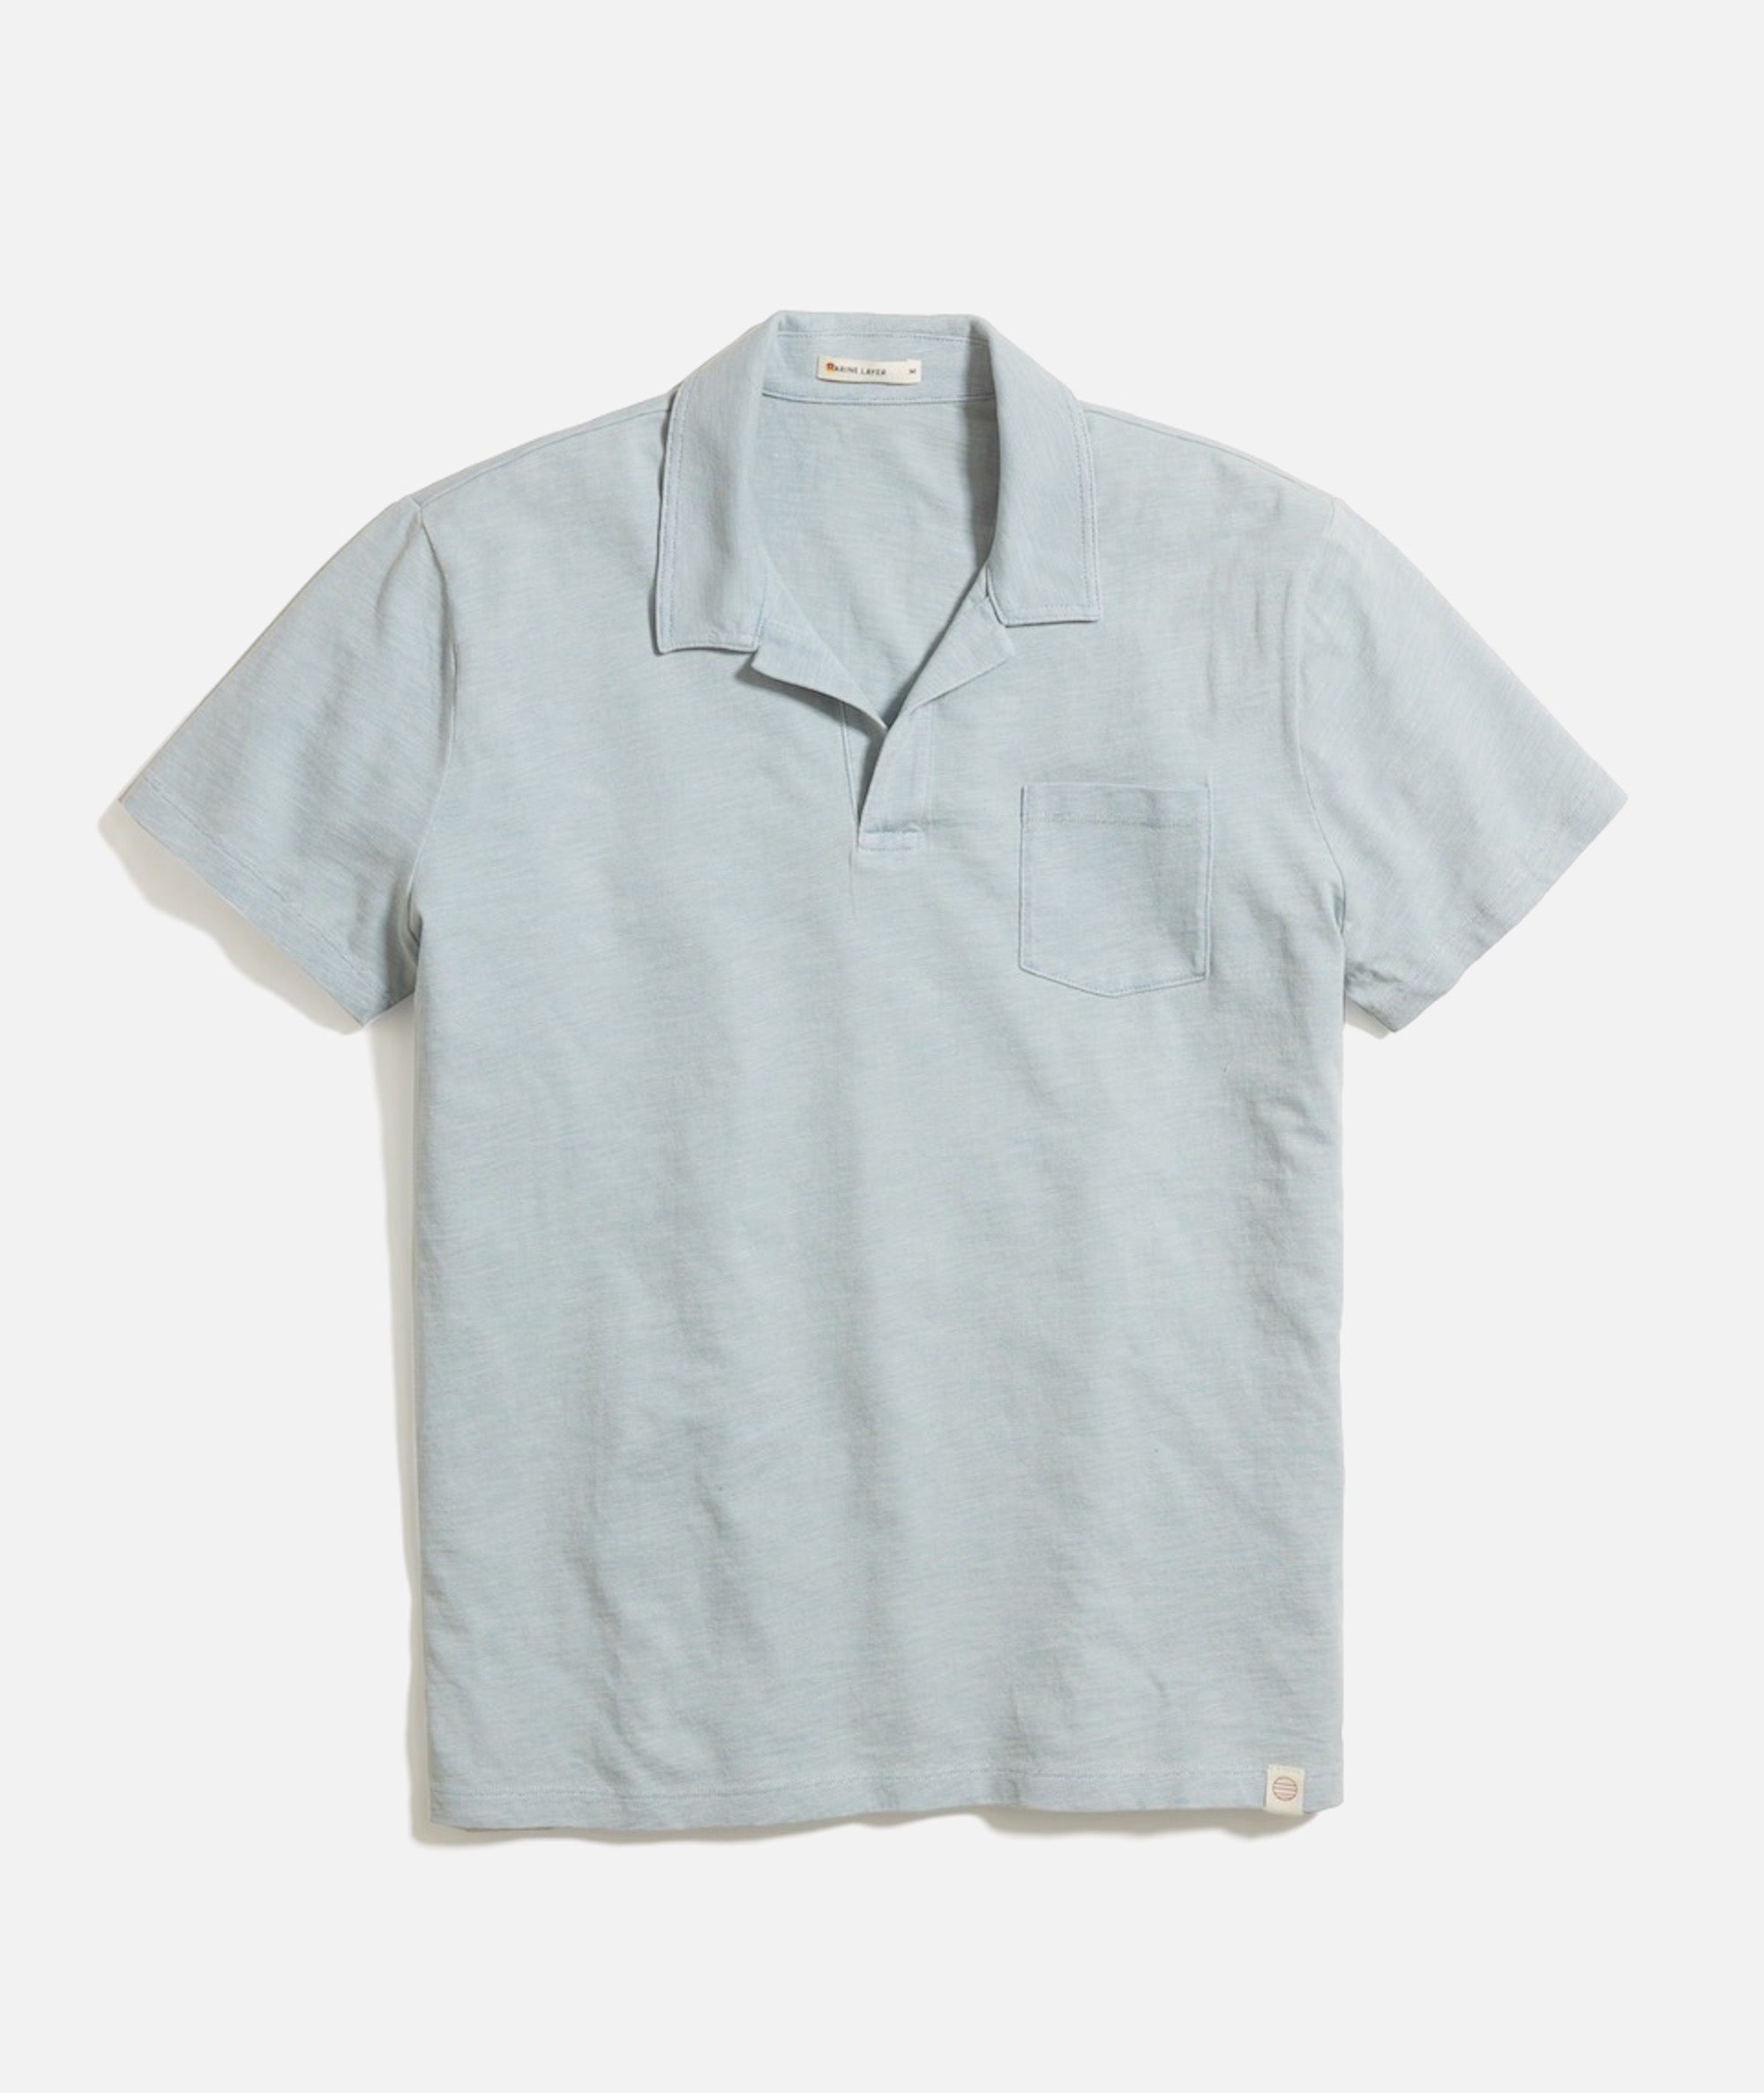 Marine Layer – China Heather Polo Pique Cool Cotton in Blue